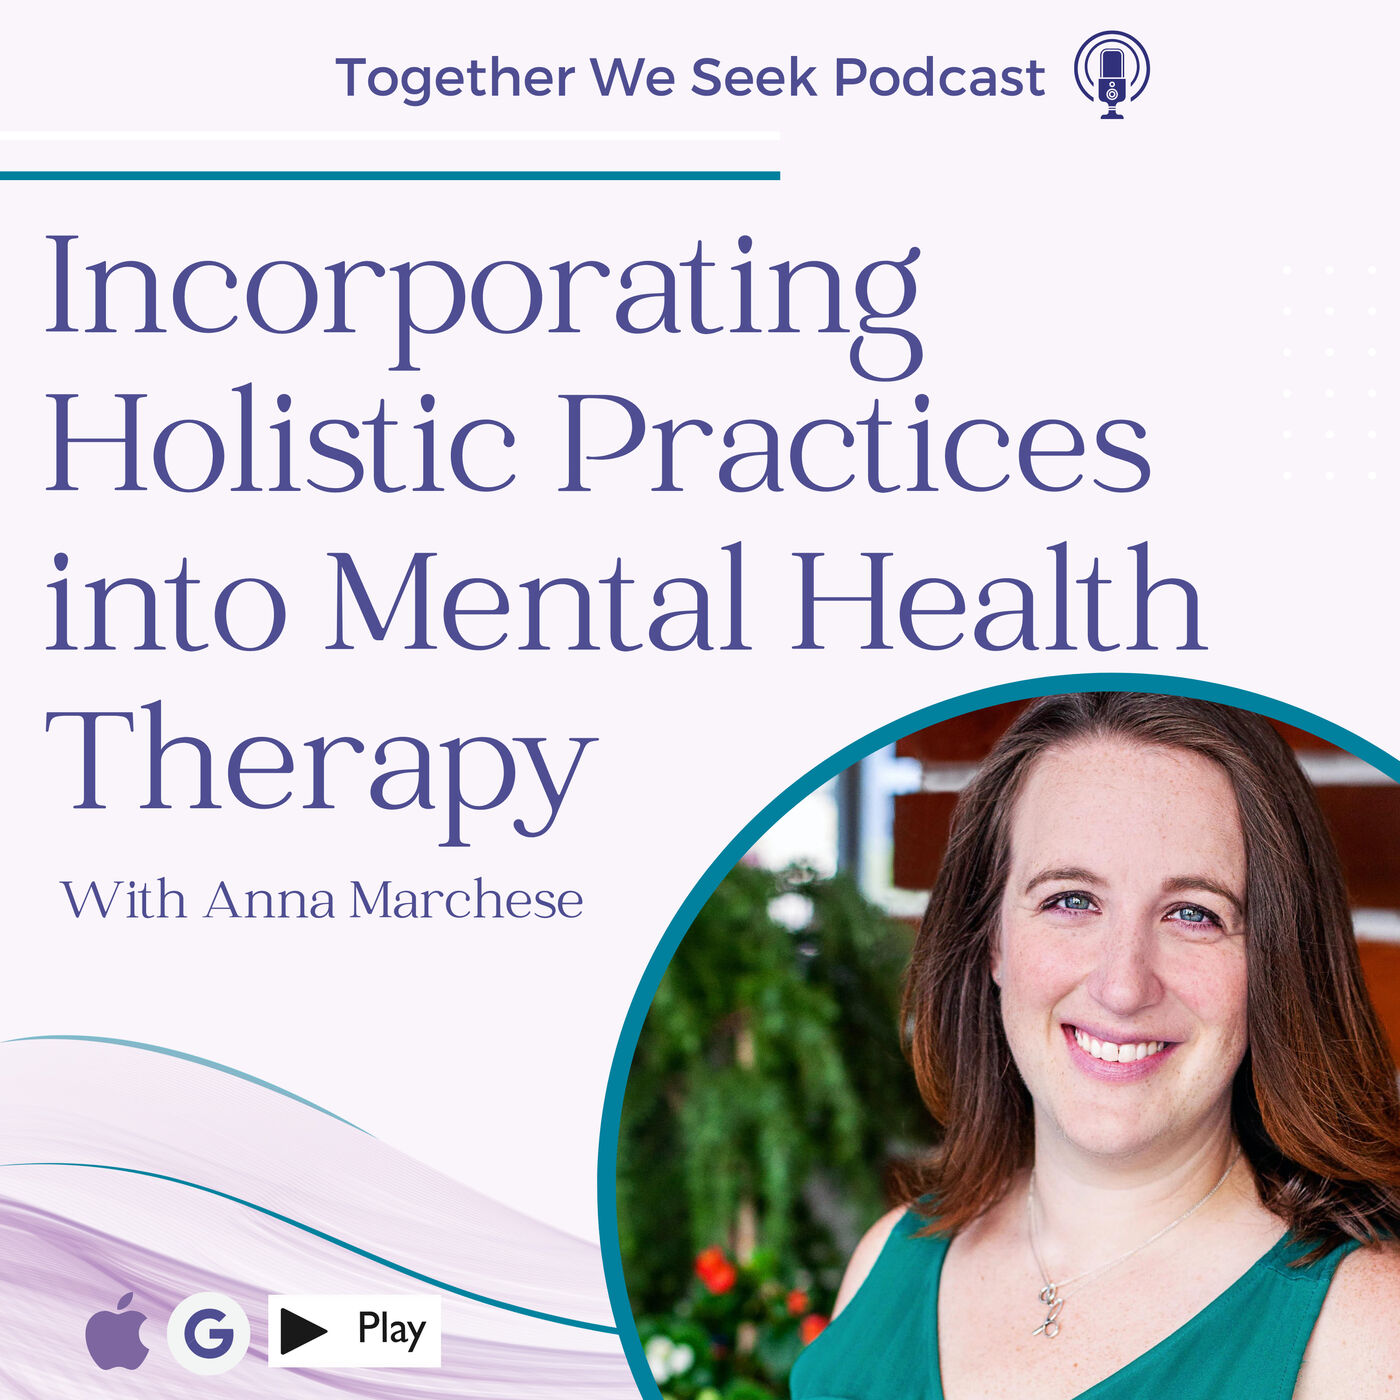 Incorporating Holistic Practices into Mental Health Therapy